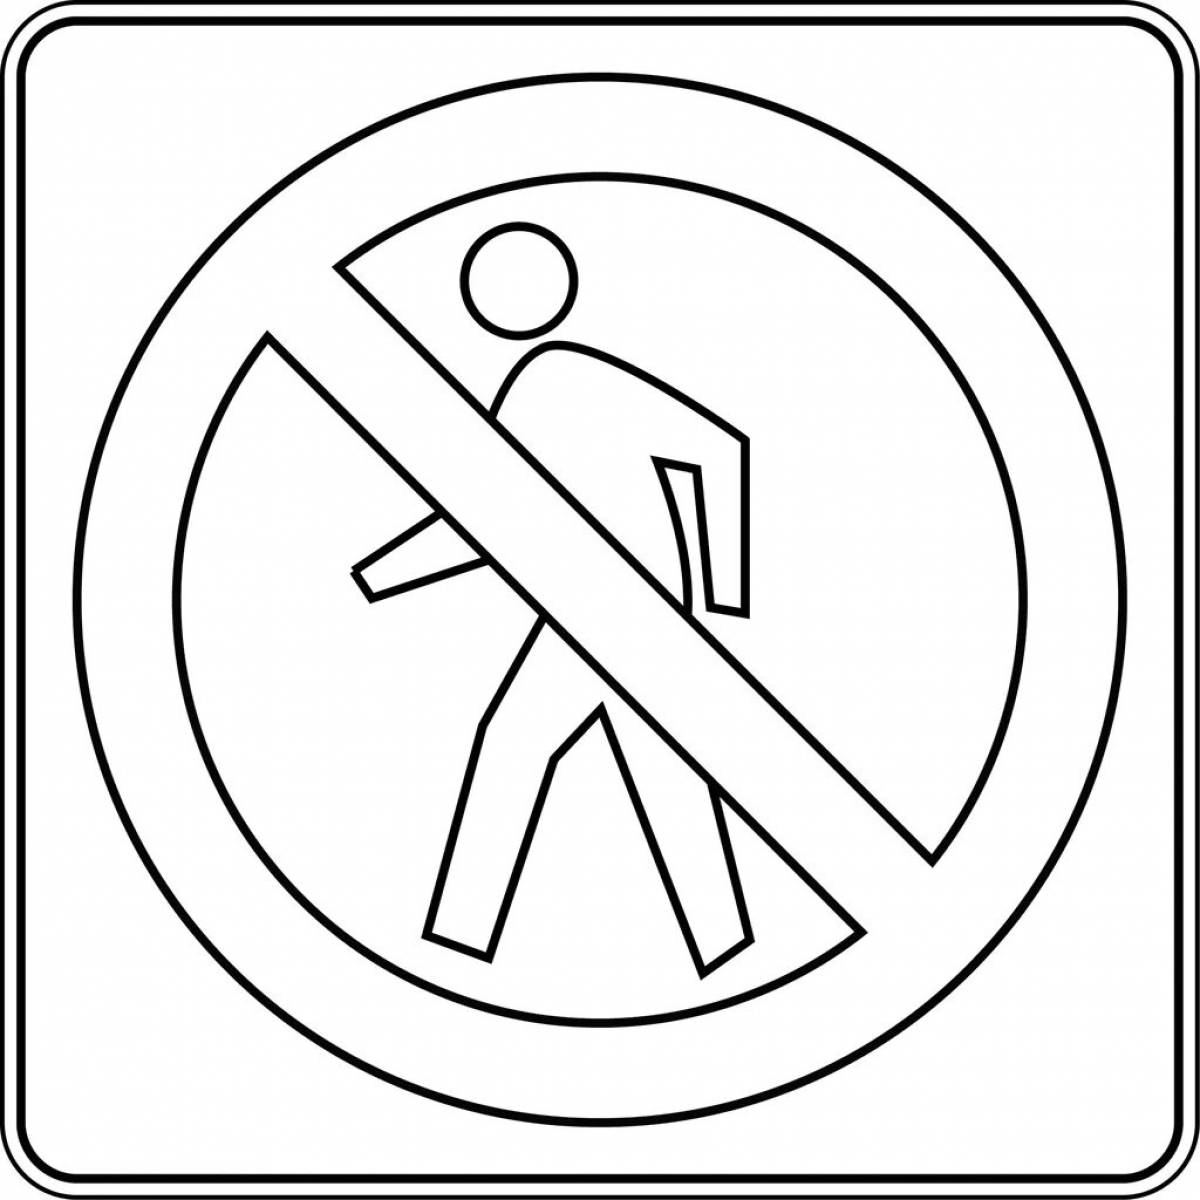 Smart security sign coloring page